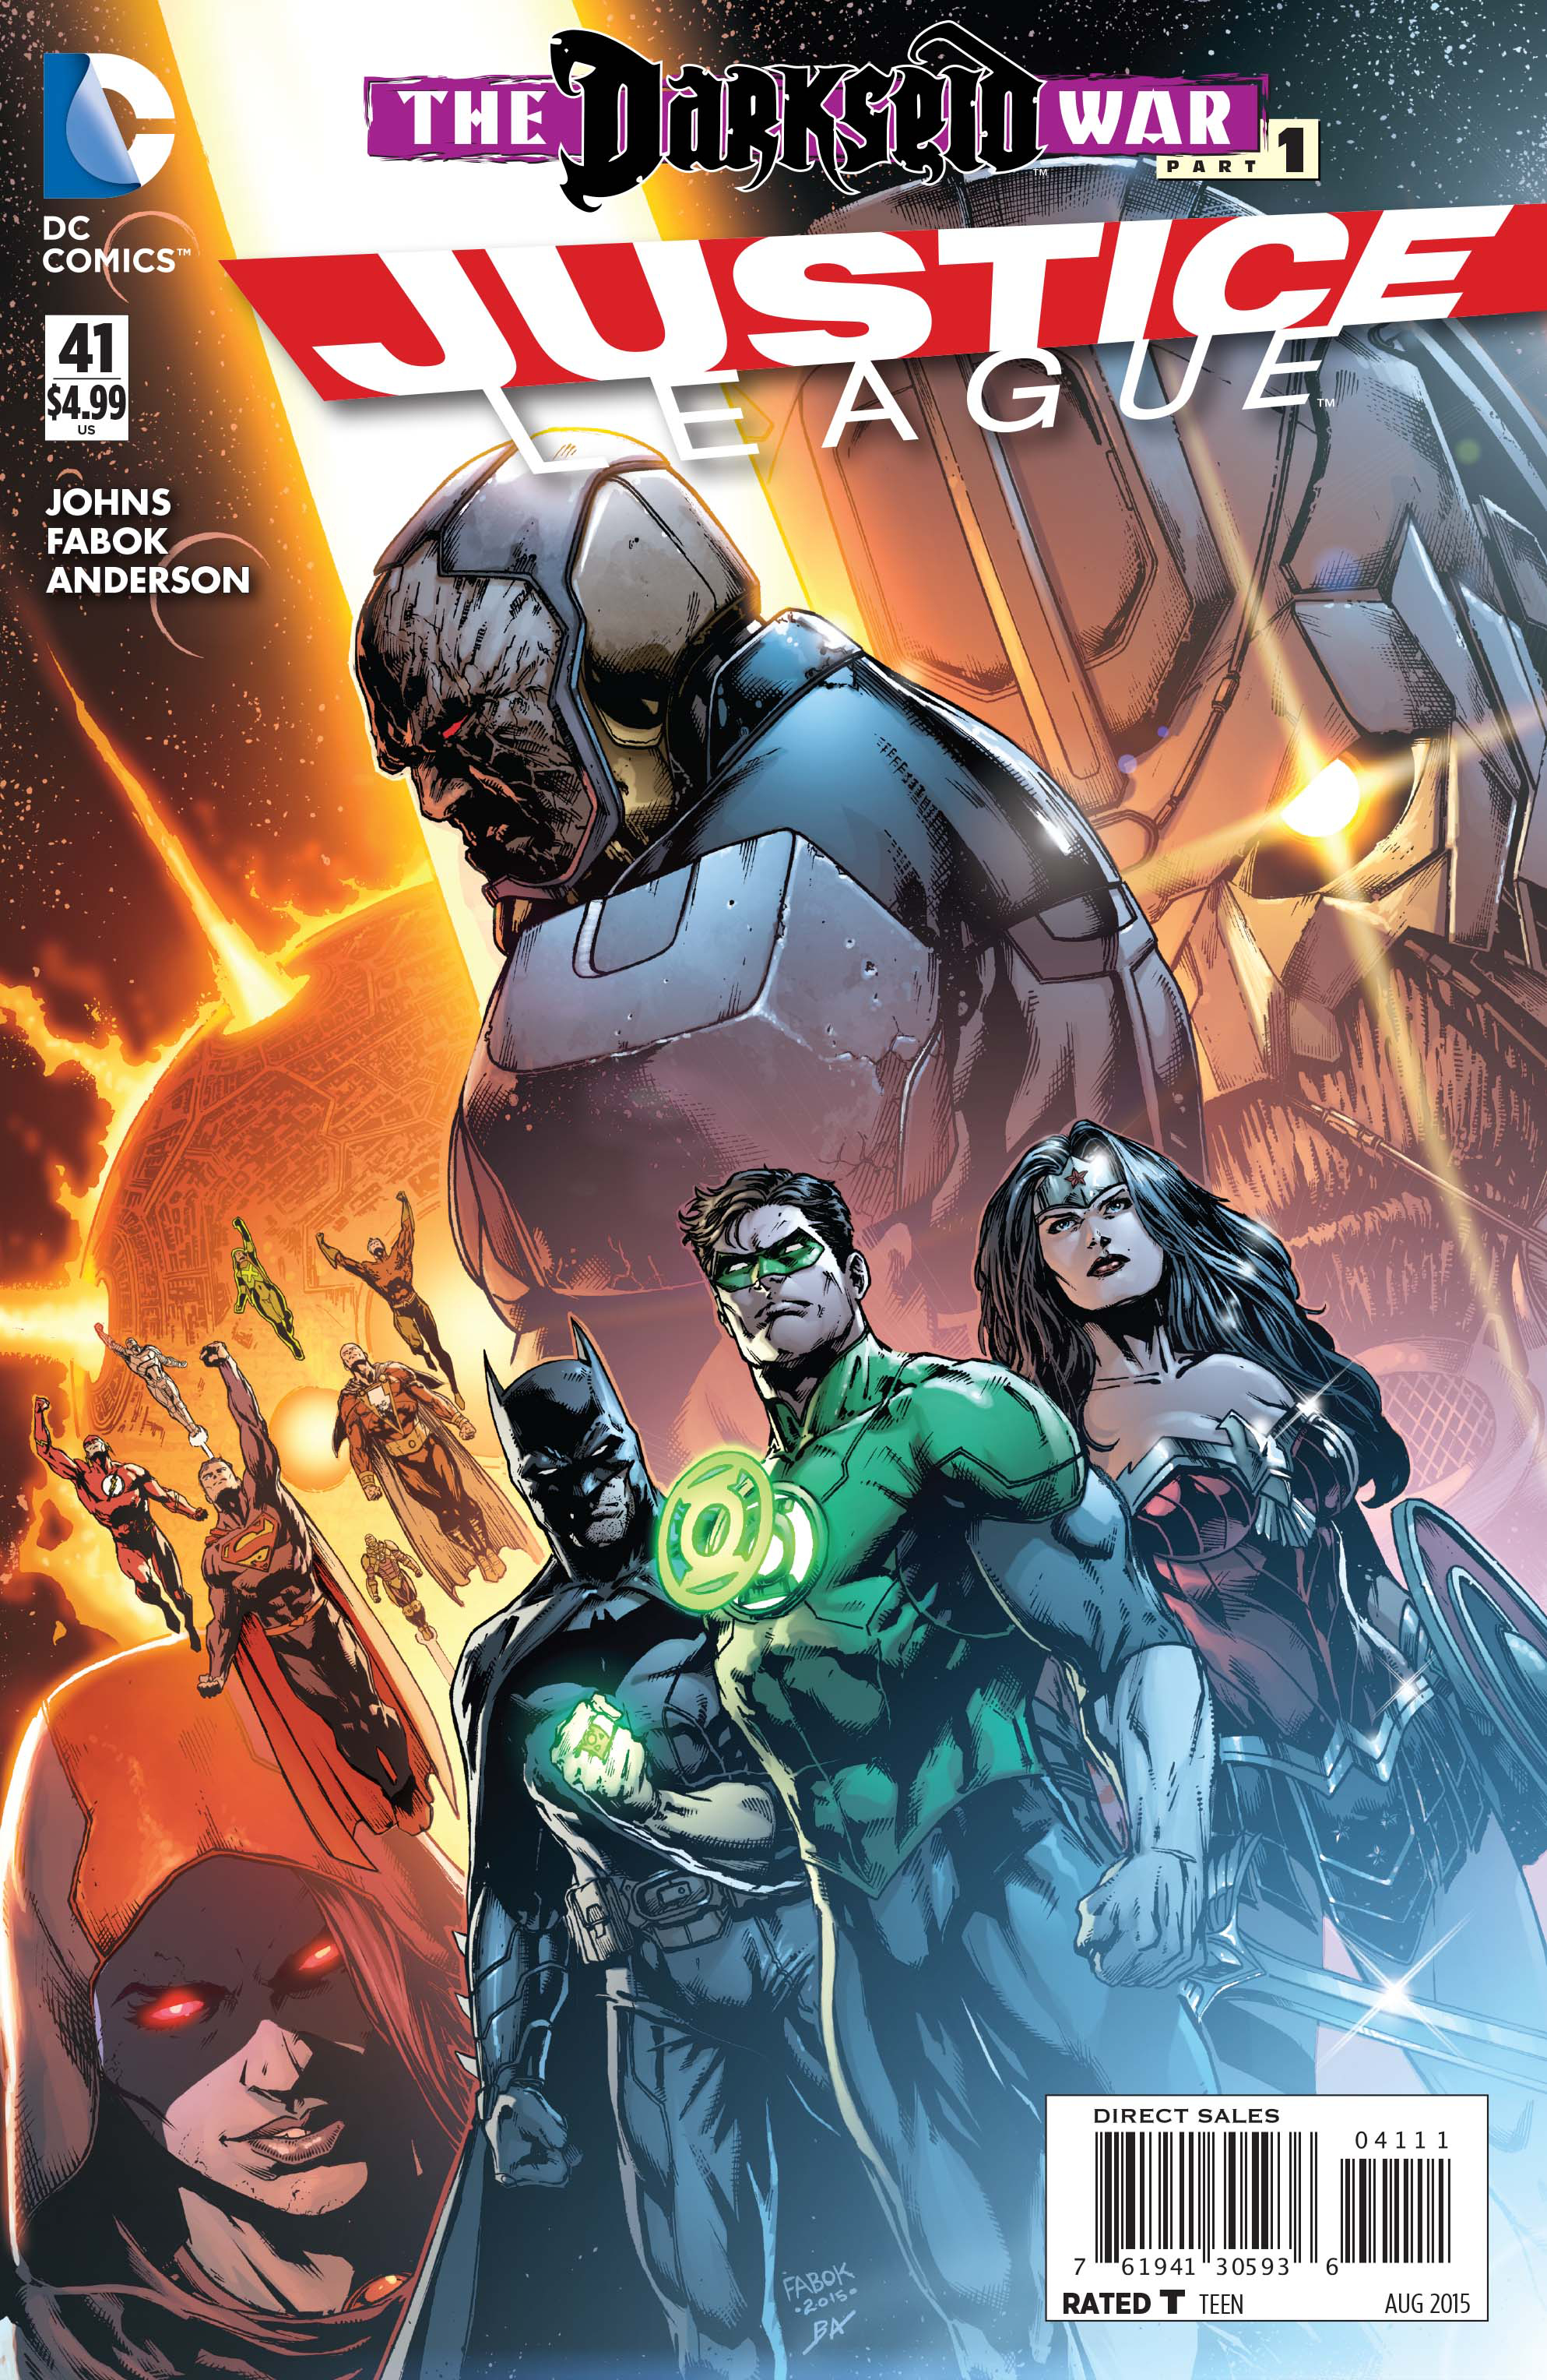 JUSTICE LEAGUE #41 (NOTE PRICE)